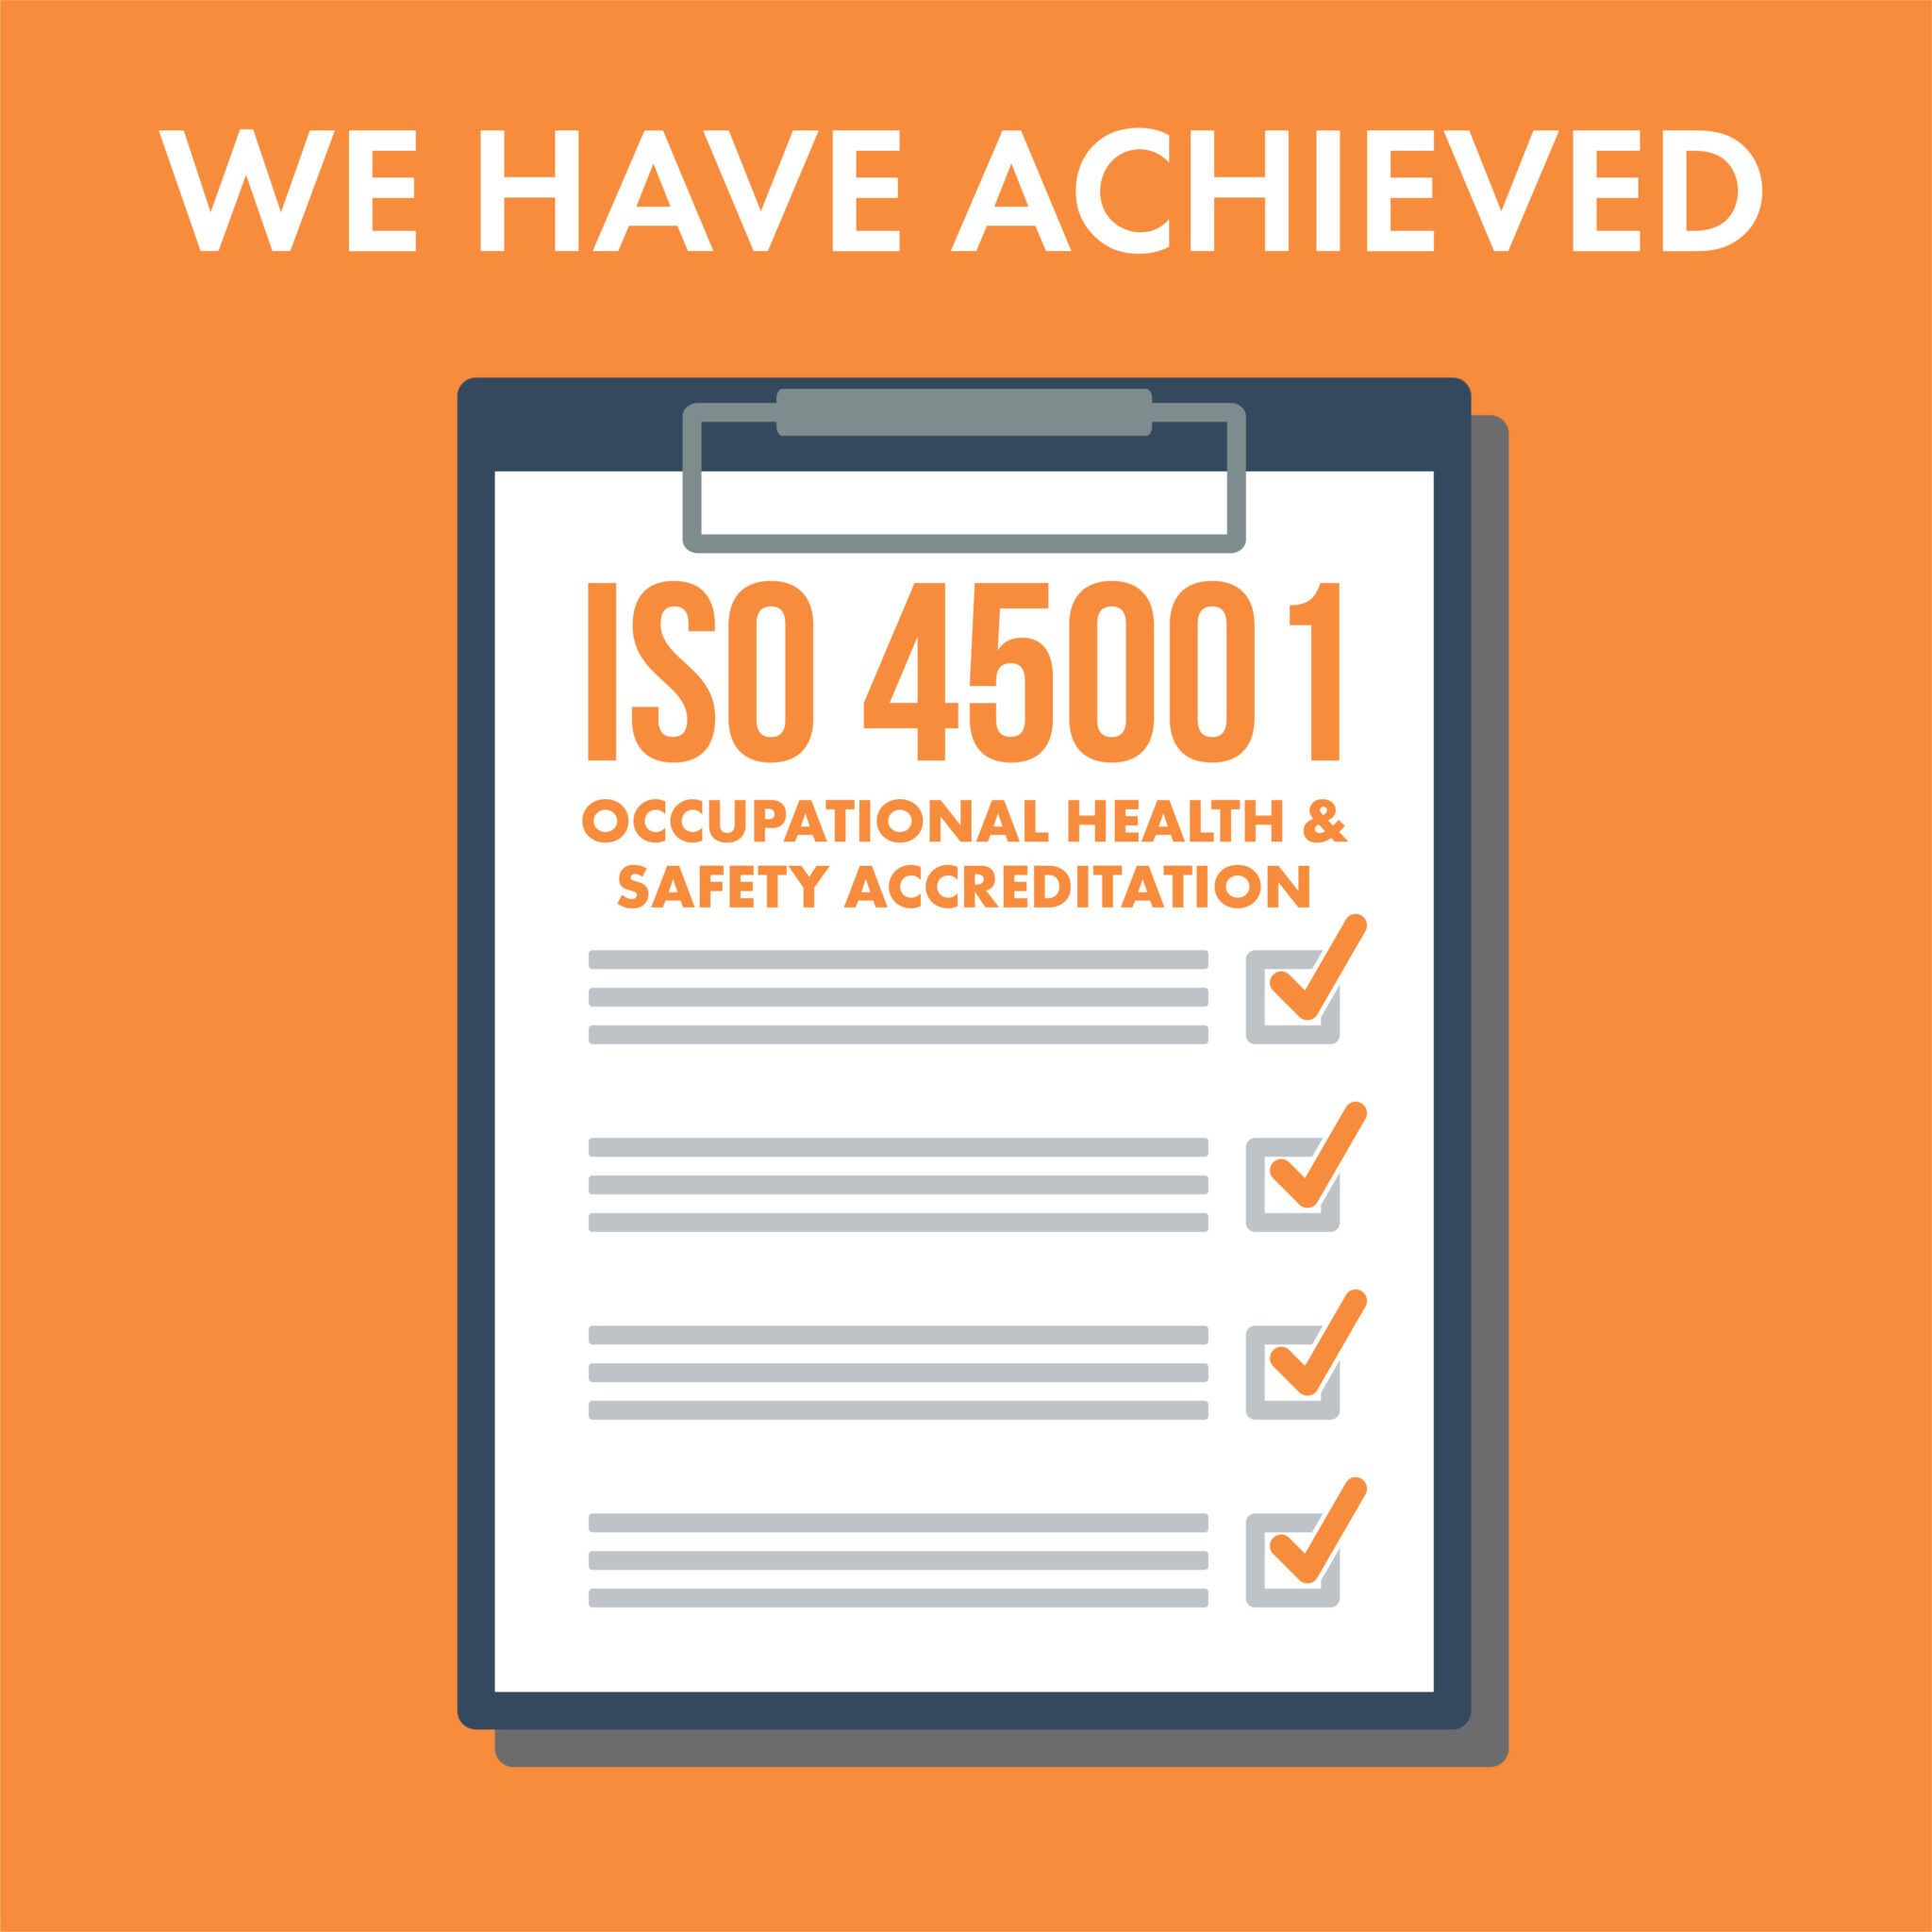 Successful migration to ISO45001 achieved